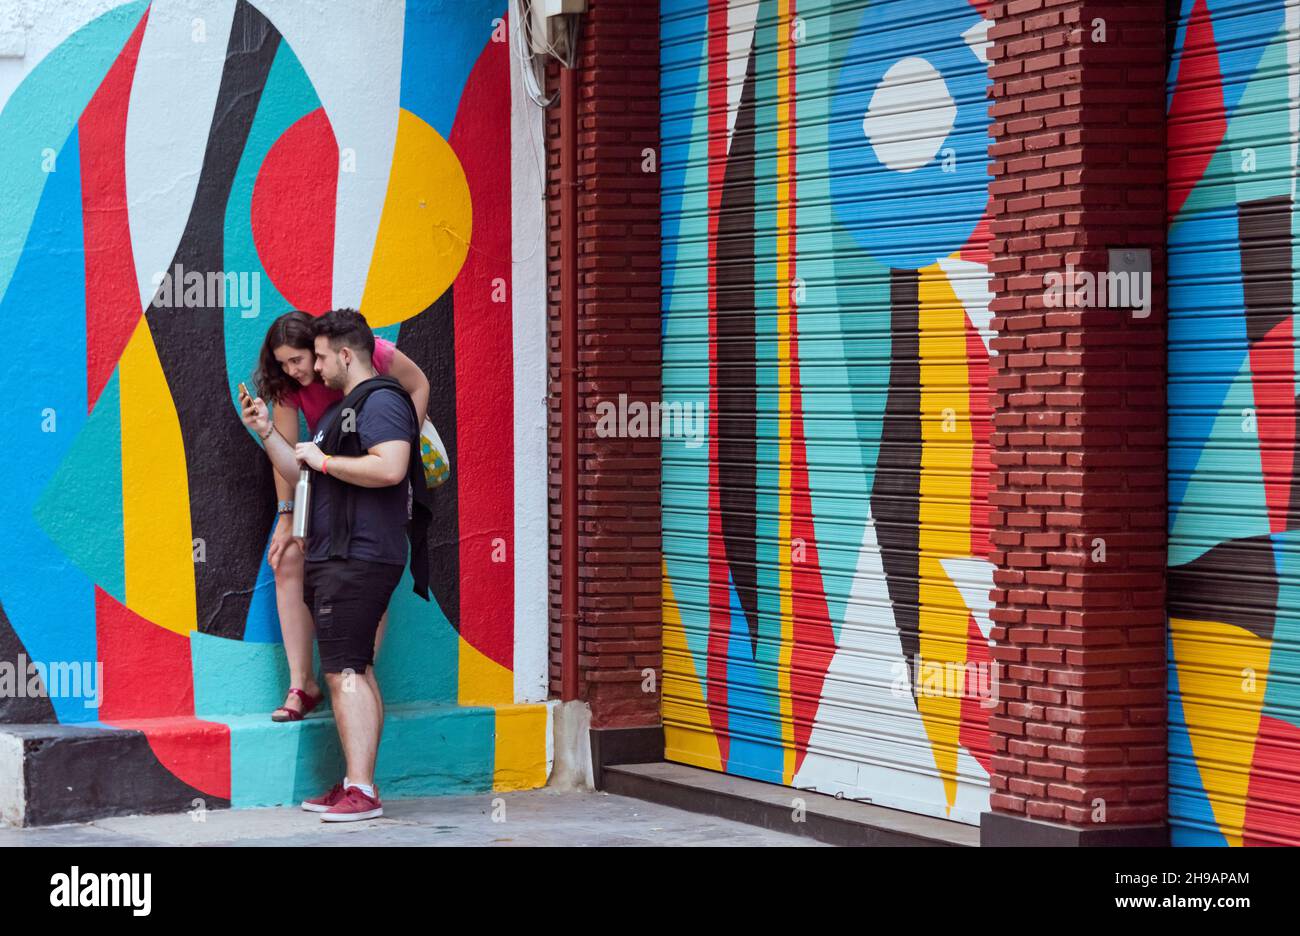 A couple looking at cell phone on the street in front of colorful mural, Valencia, Spain Stock Photo